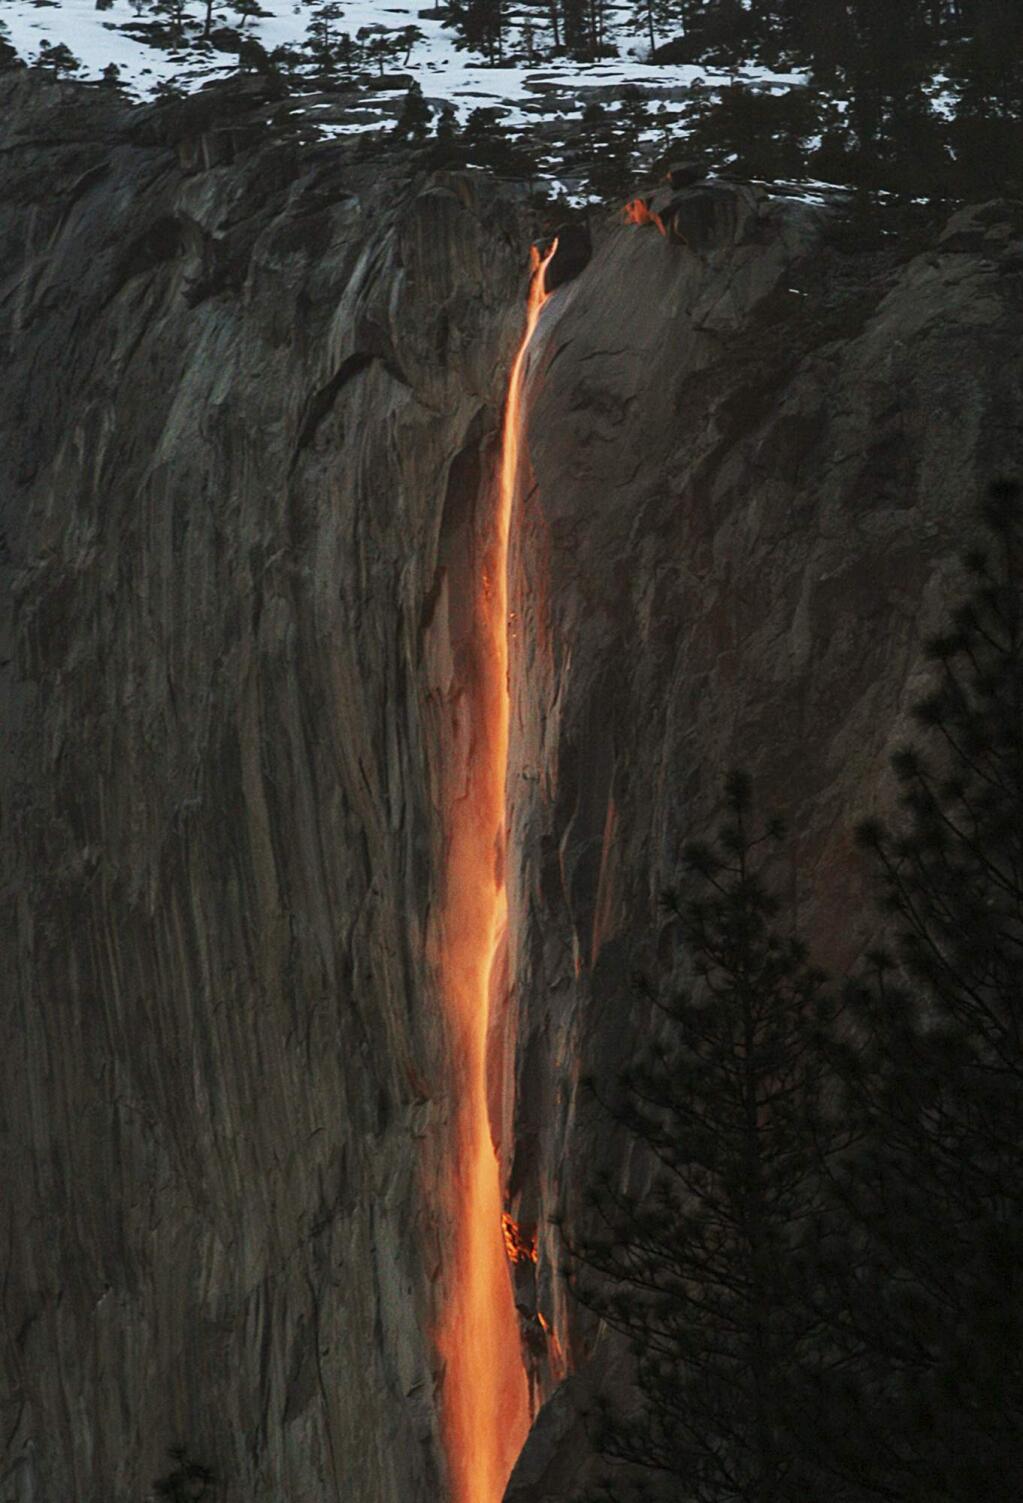 FILE - In this Feb. 16, 2010, file photo, a shaft of sunlight creates a glow near Horsetail Fall, in Yosemite National Park, Calif. Mother Nature is again putting on a show at California's Yosemite National Park, where every February the setting sun draws a narrow sliver on a waterfall to make it glow like a cascade of molten lava. The phenomenon known as “firefall” draws scores of photographers to the spot, which flows down the granite face of the park's famed rock formation, El Capitan. (Eric Paul Zamora/The Fresno Bee via AP, File)